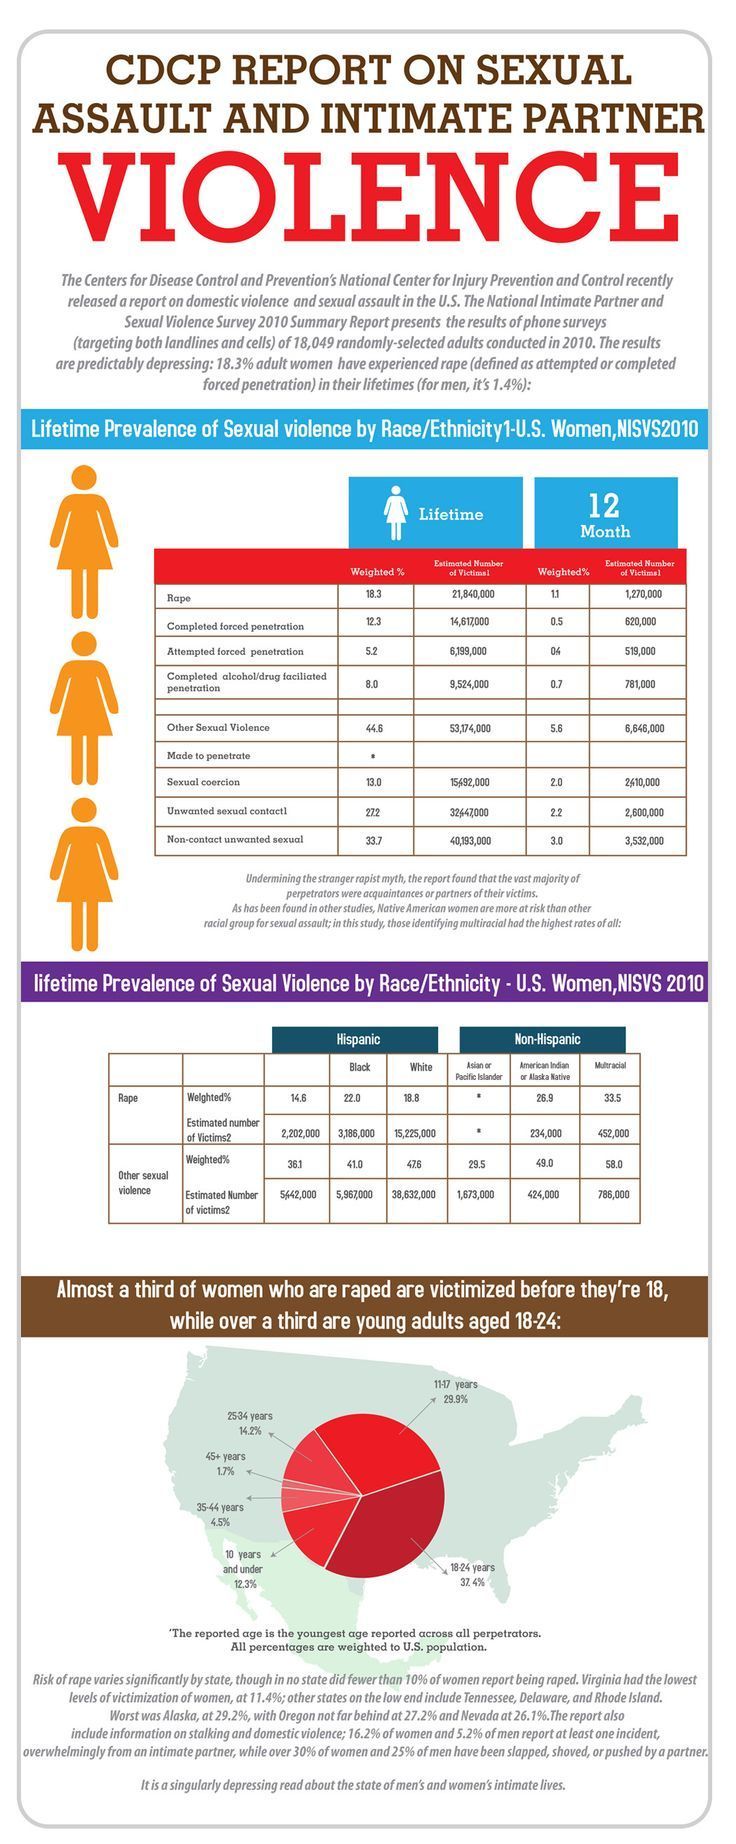 Who 2013 intimate partner violence. Intimate partner violence on women Health stata. Impact of intimate partner violence on women Health across developing Countries stata.